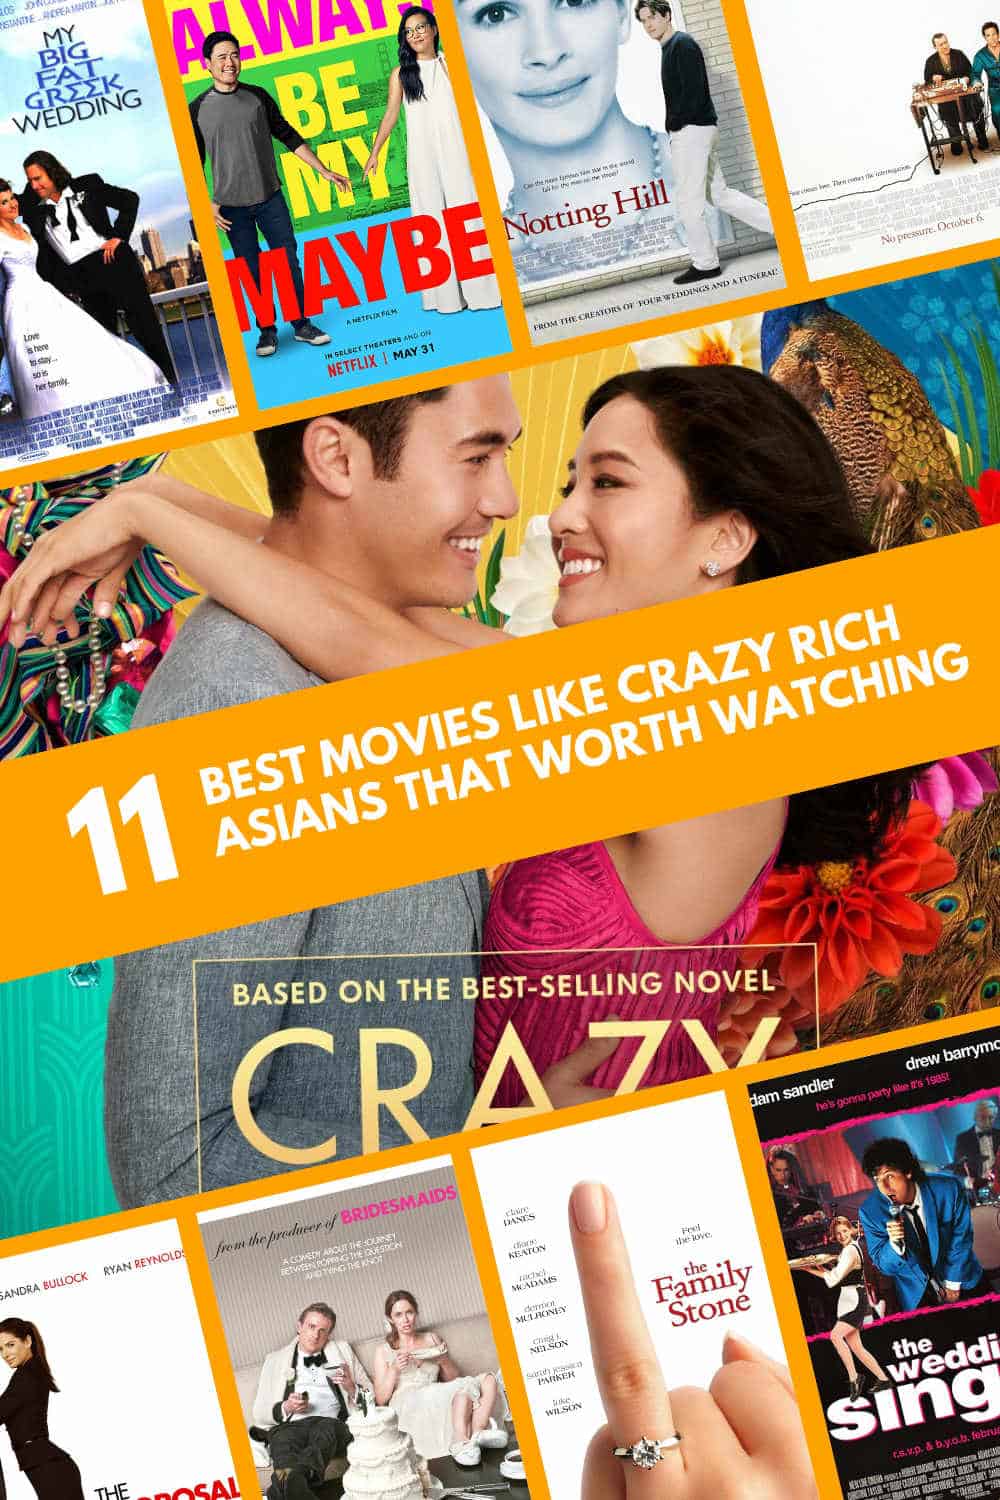 Movie Like Crazy Rich Asians That Worth Watching